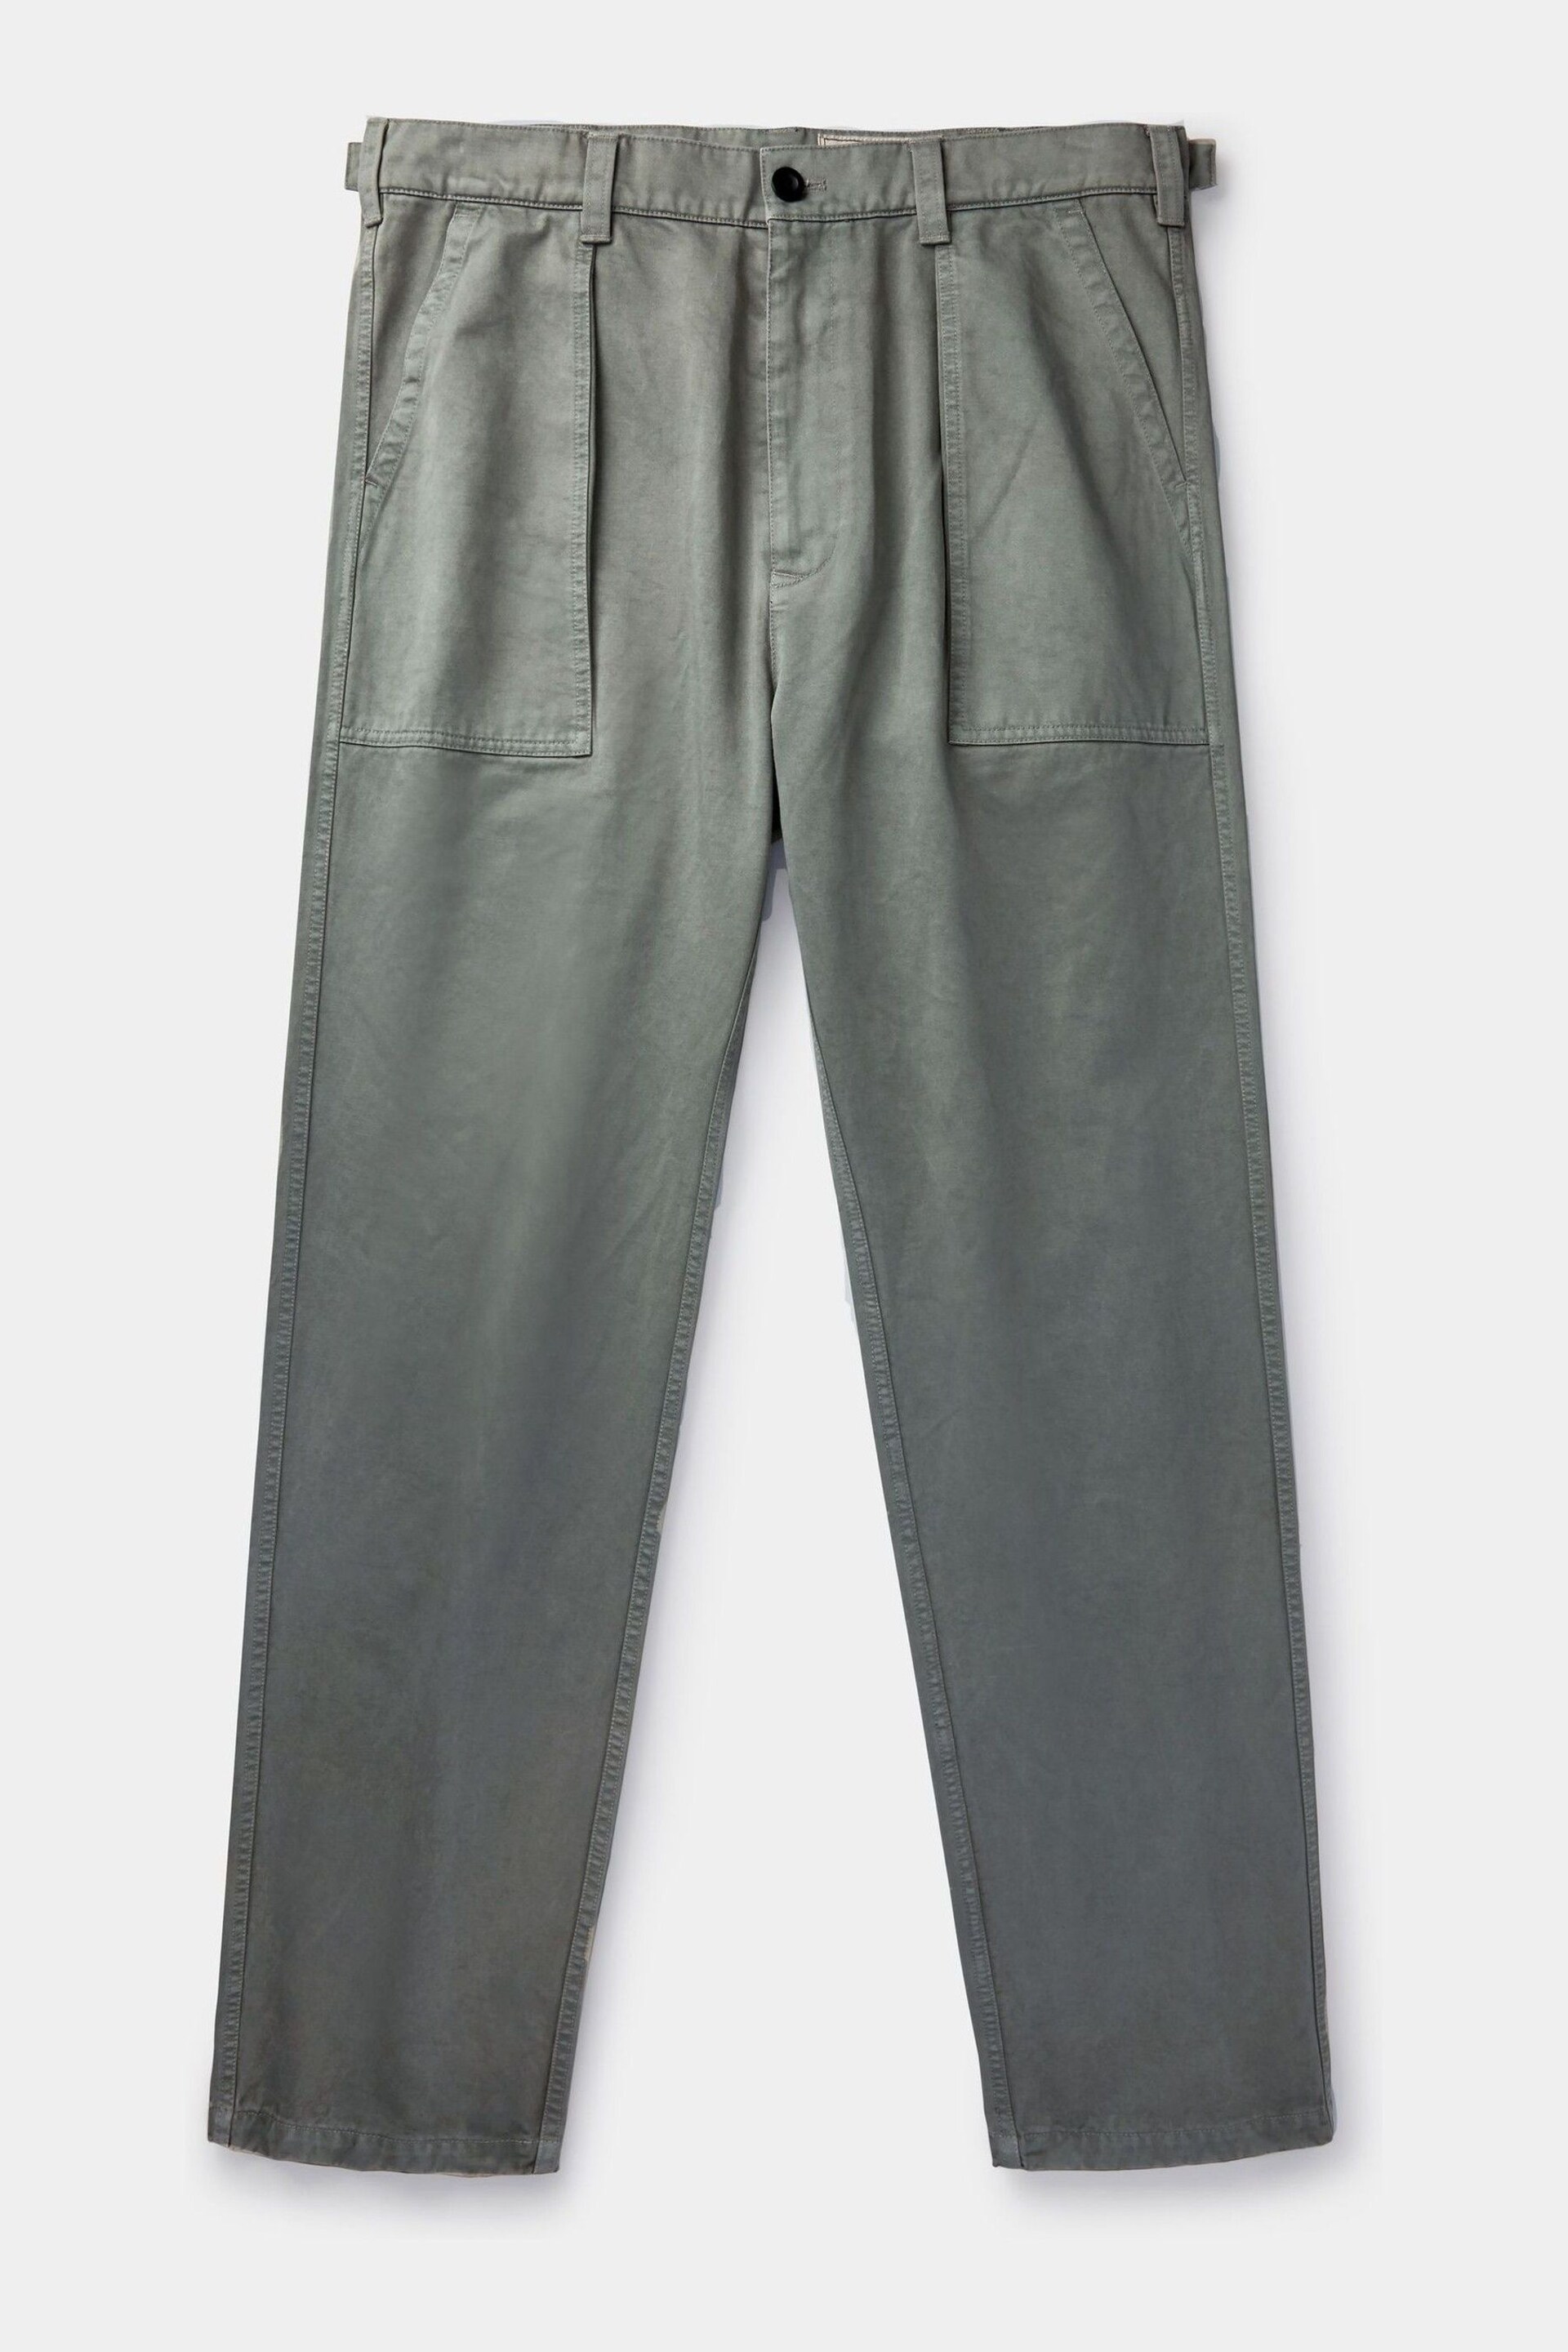 Aubin Beck Military Trousers - Image 6 of 6